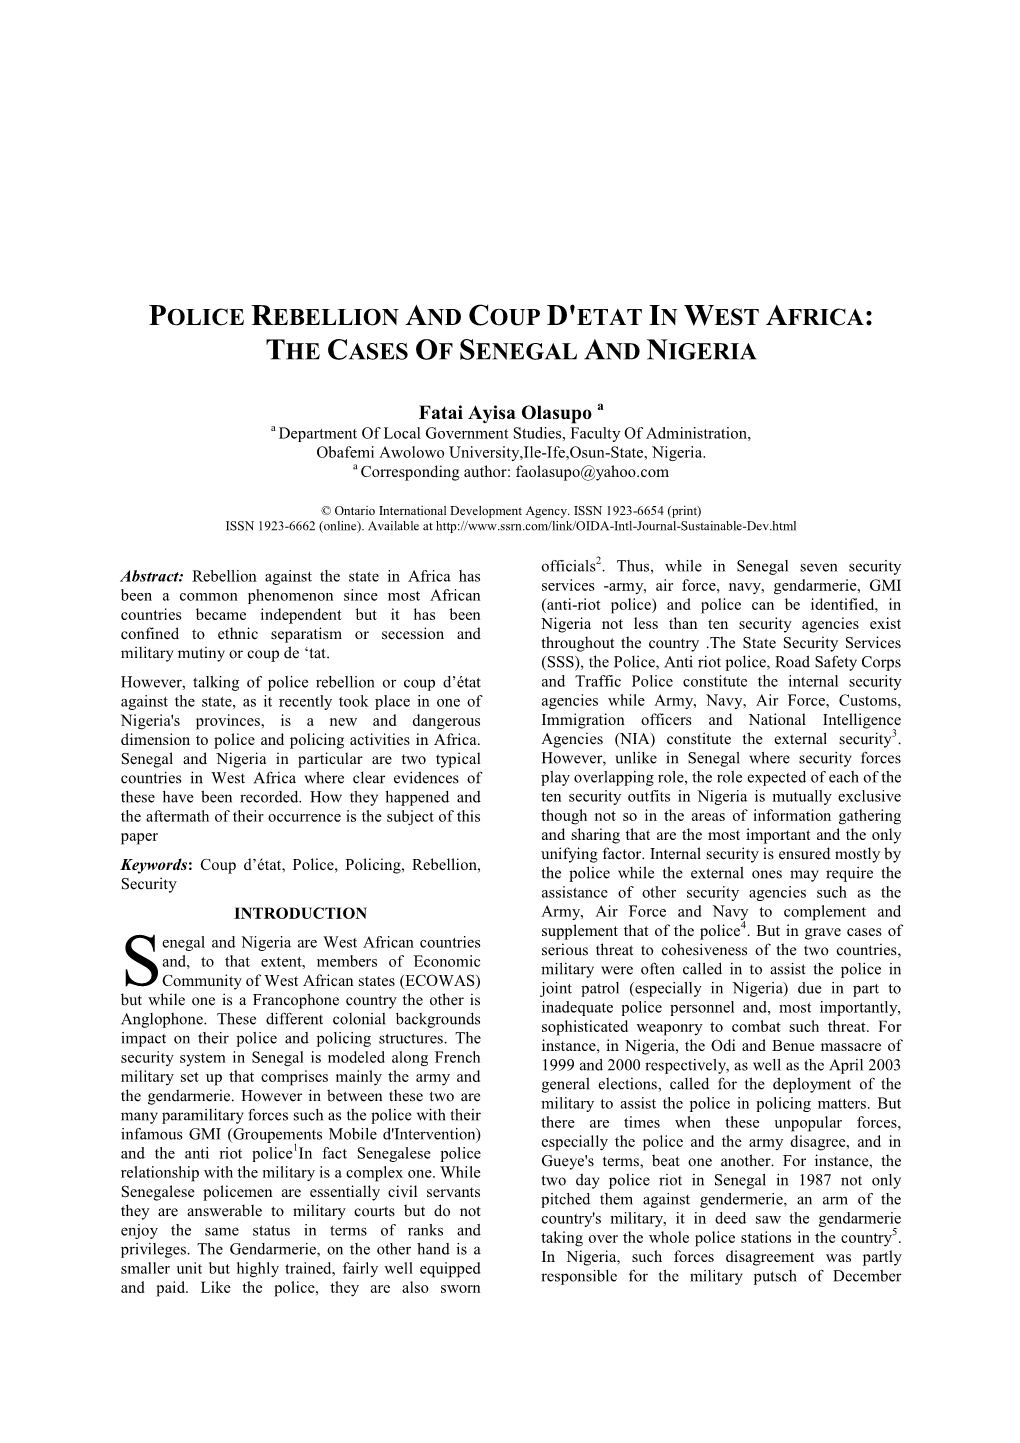 Police Rebellion and Coup D'etat in West Africa: the Cases of Senegal and Nigeria